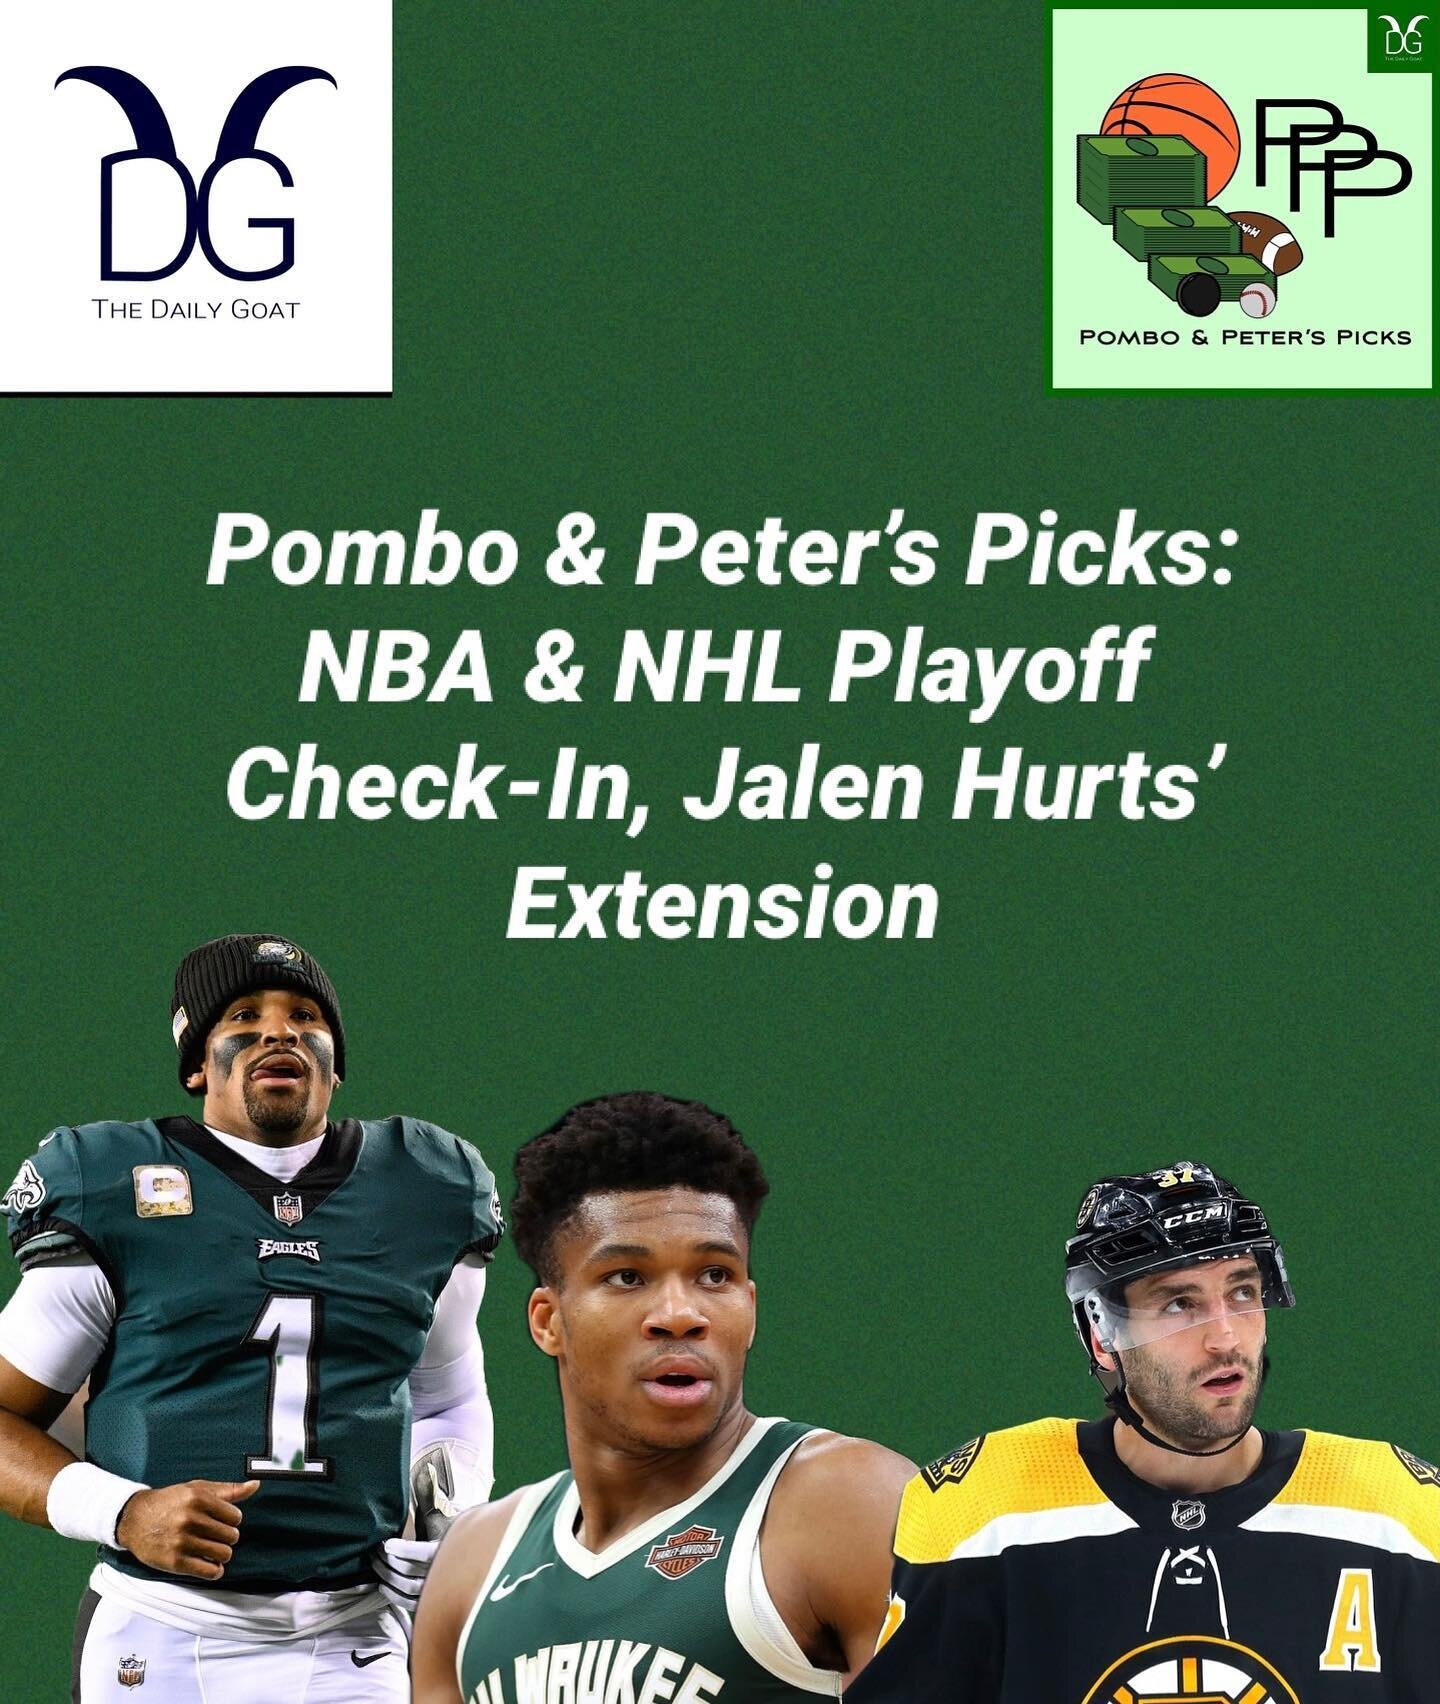 The new episode of @_pppicks with @jpombo24 &amp; @peteralves52 is out!

🏀 NBA  Playoff Update!

🏒 NHL Playoff Update!

🦅 Reaction to the Jalen Hurts extension!

Link on our 👉 Instagram Story
Or
Link in bio 👉 podcasts 👉 @_pppicks 

#TheDailyGoa